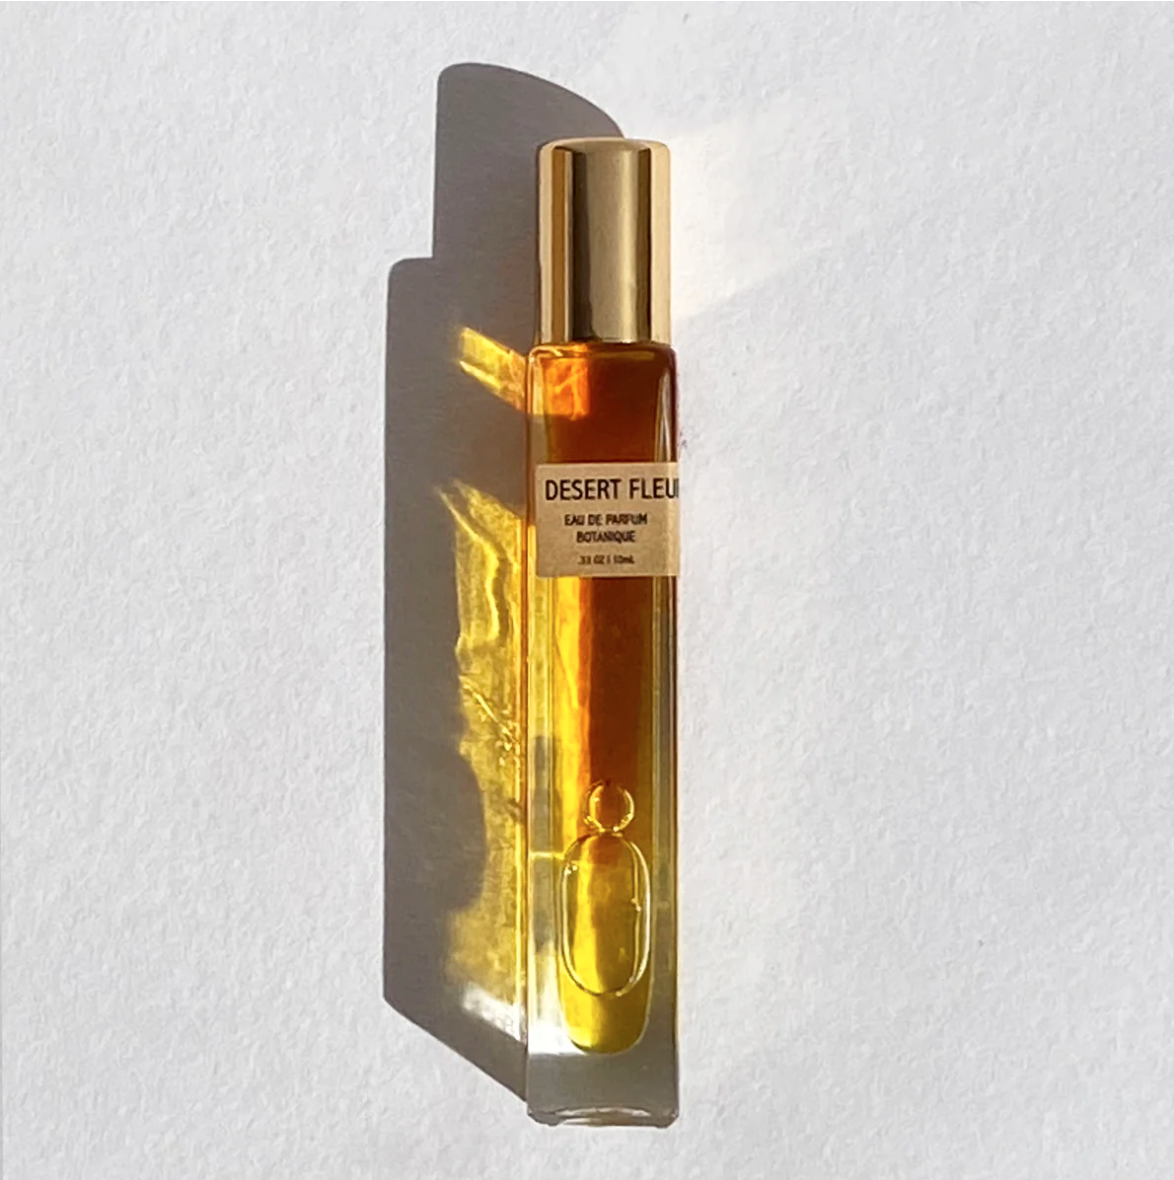 A bottle of &quot;Desert Fleur Parfum&quot; by Faire against a white background, photographed in a Scottsdale Arizona bungalow, with sunlight casting sharp shadows to the left. The perfume liquid is amber-colored.